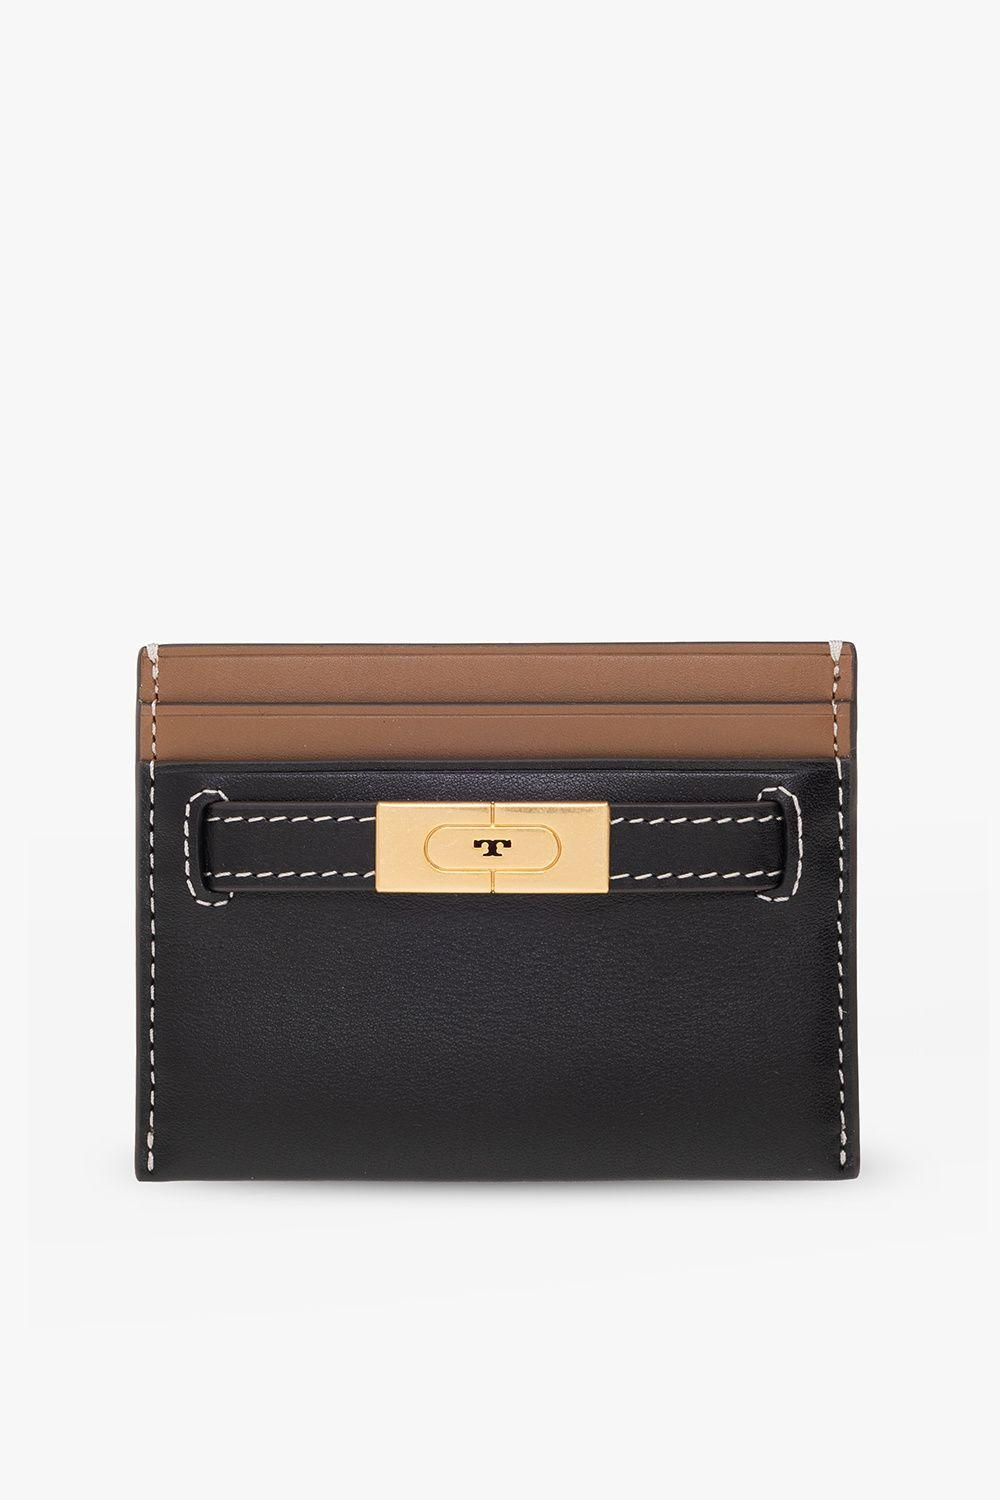 Tory Burch Leather Card Holder in Black | Lyst